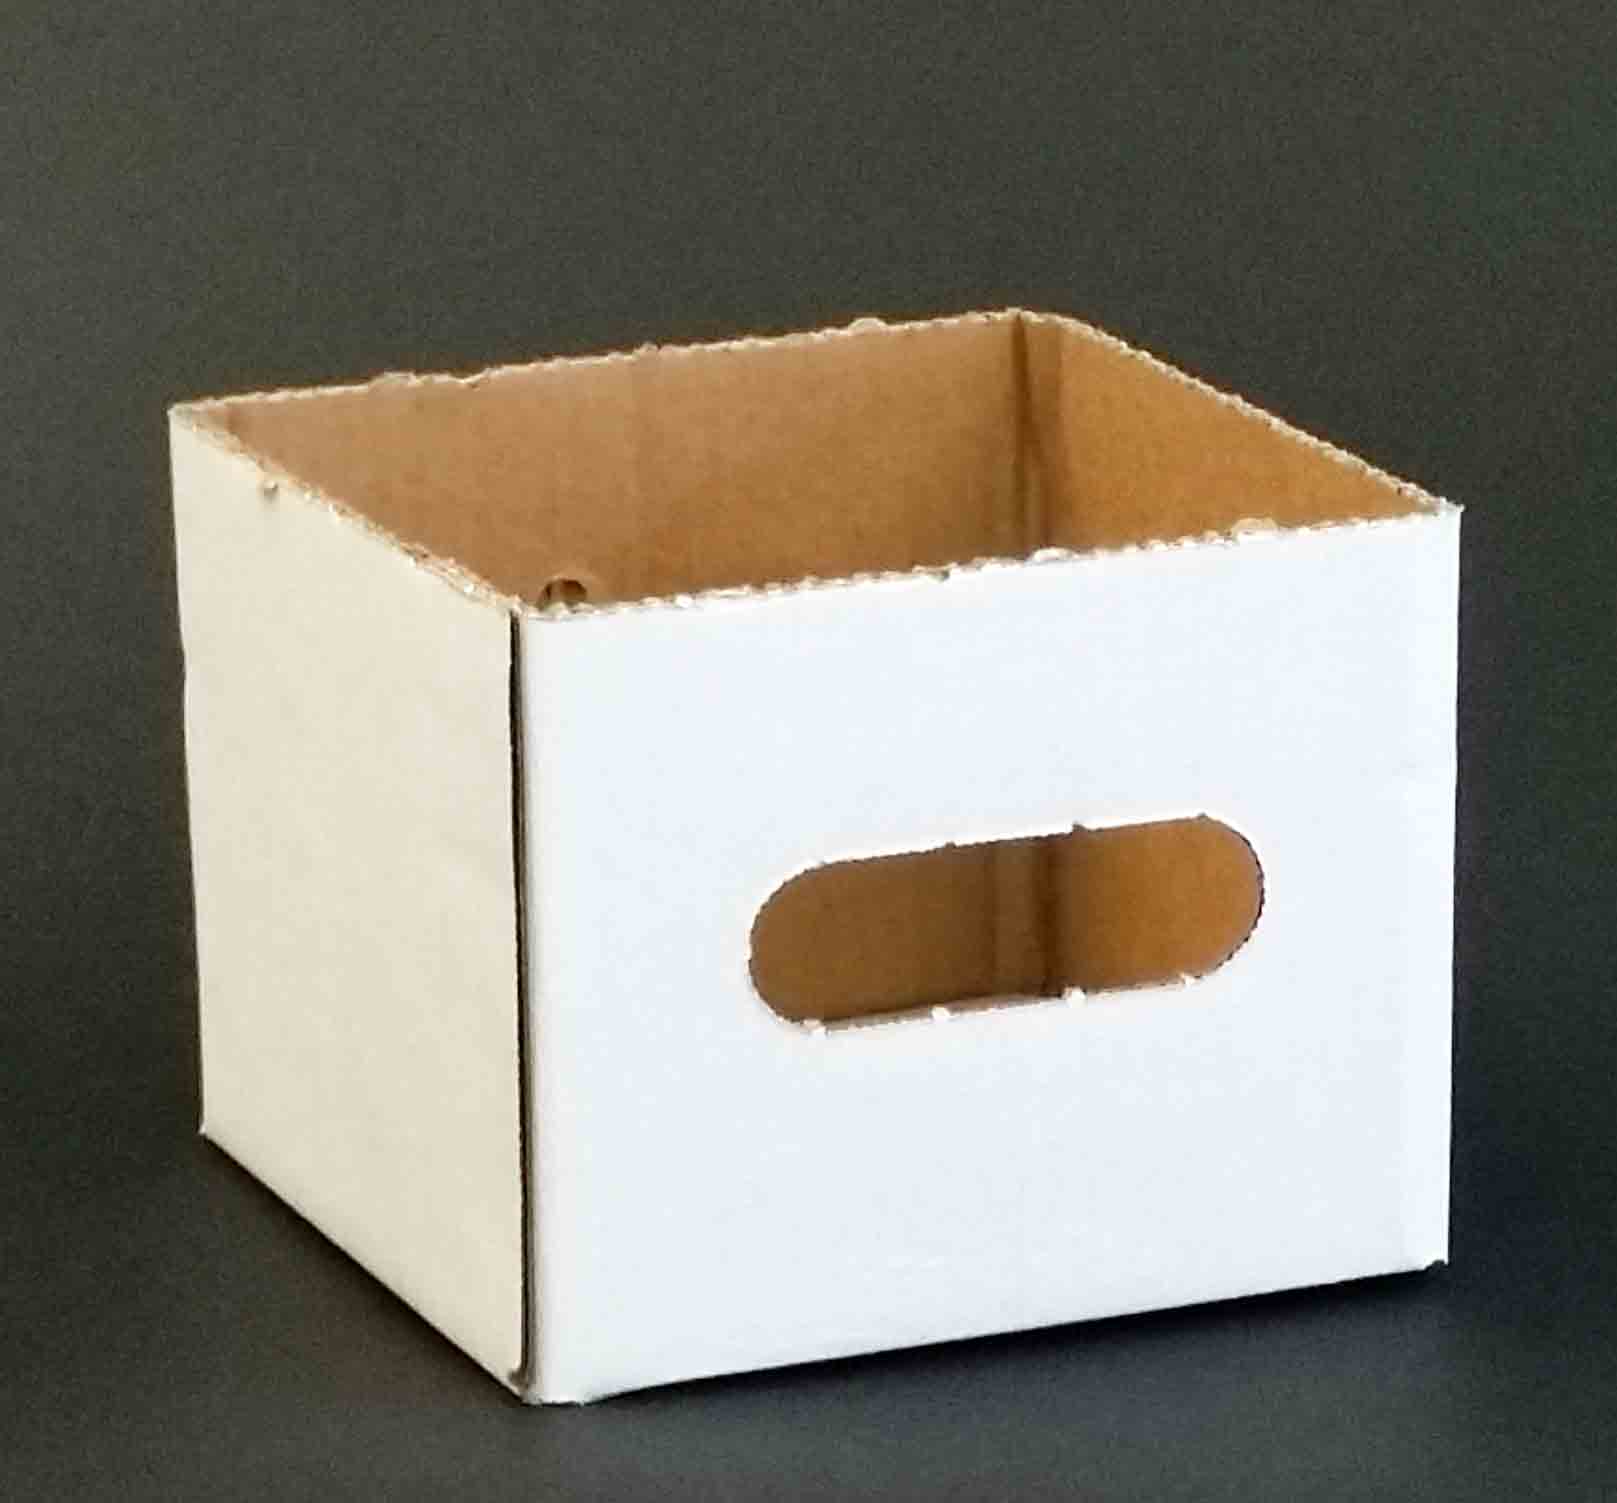 765 - 6 x 6 x 5" Delivery Box - 22.95 bdle of 50